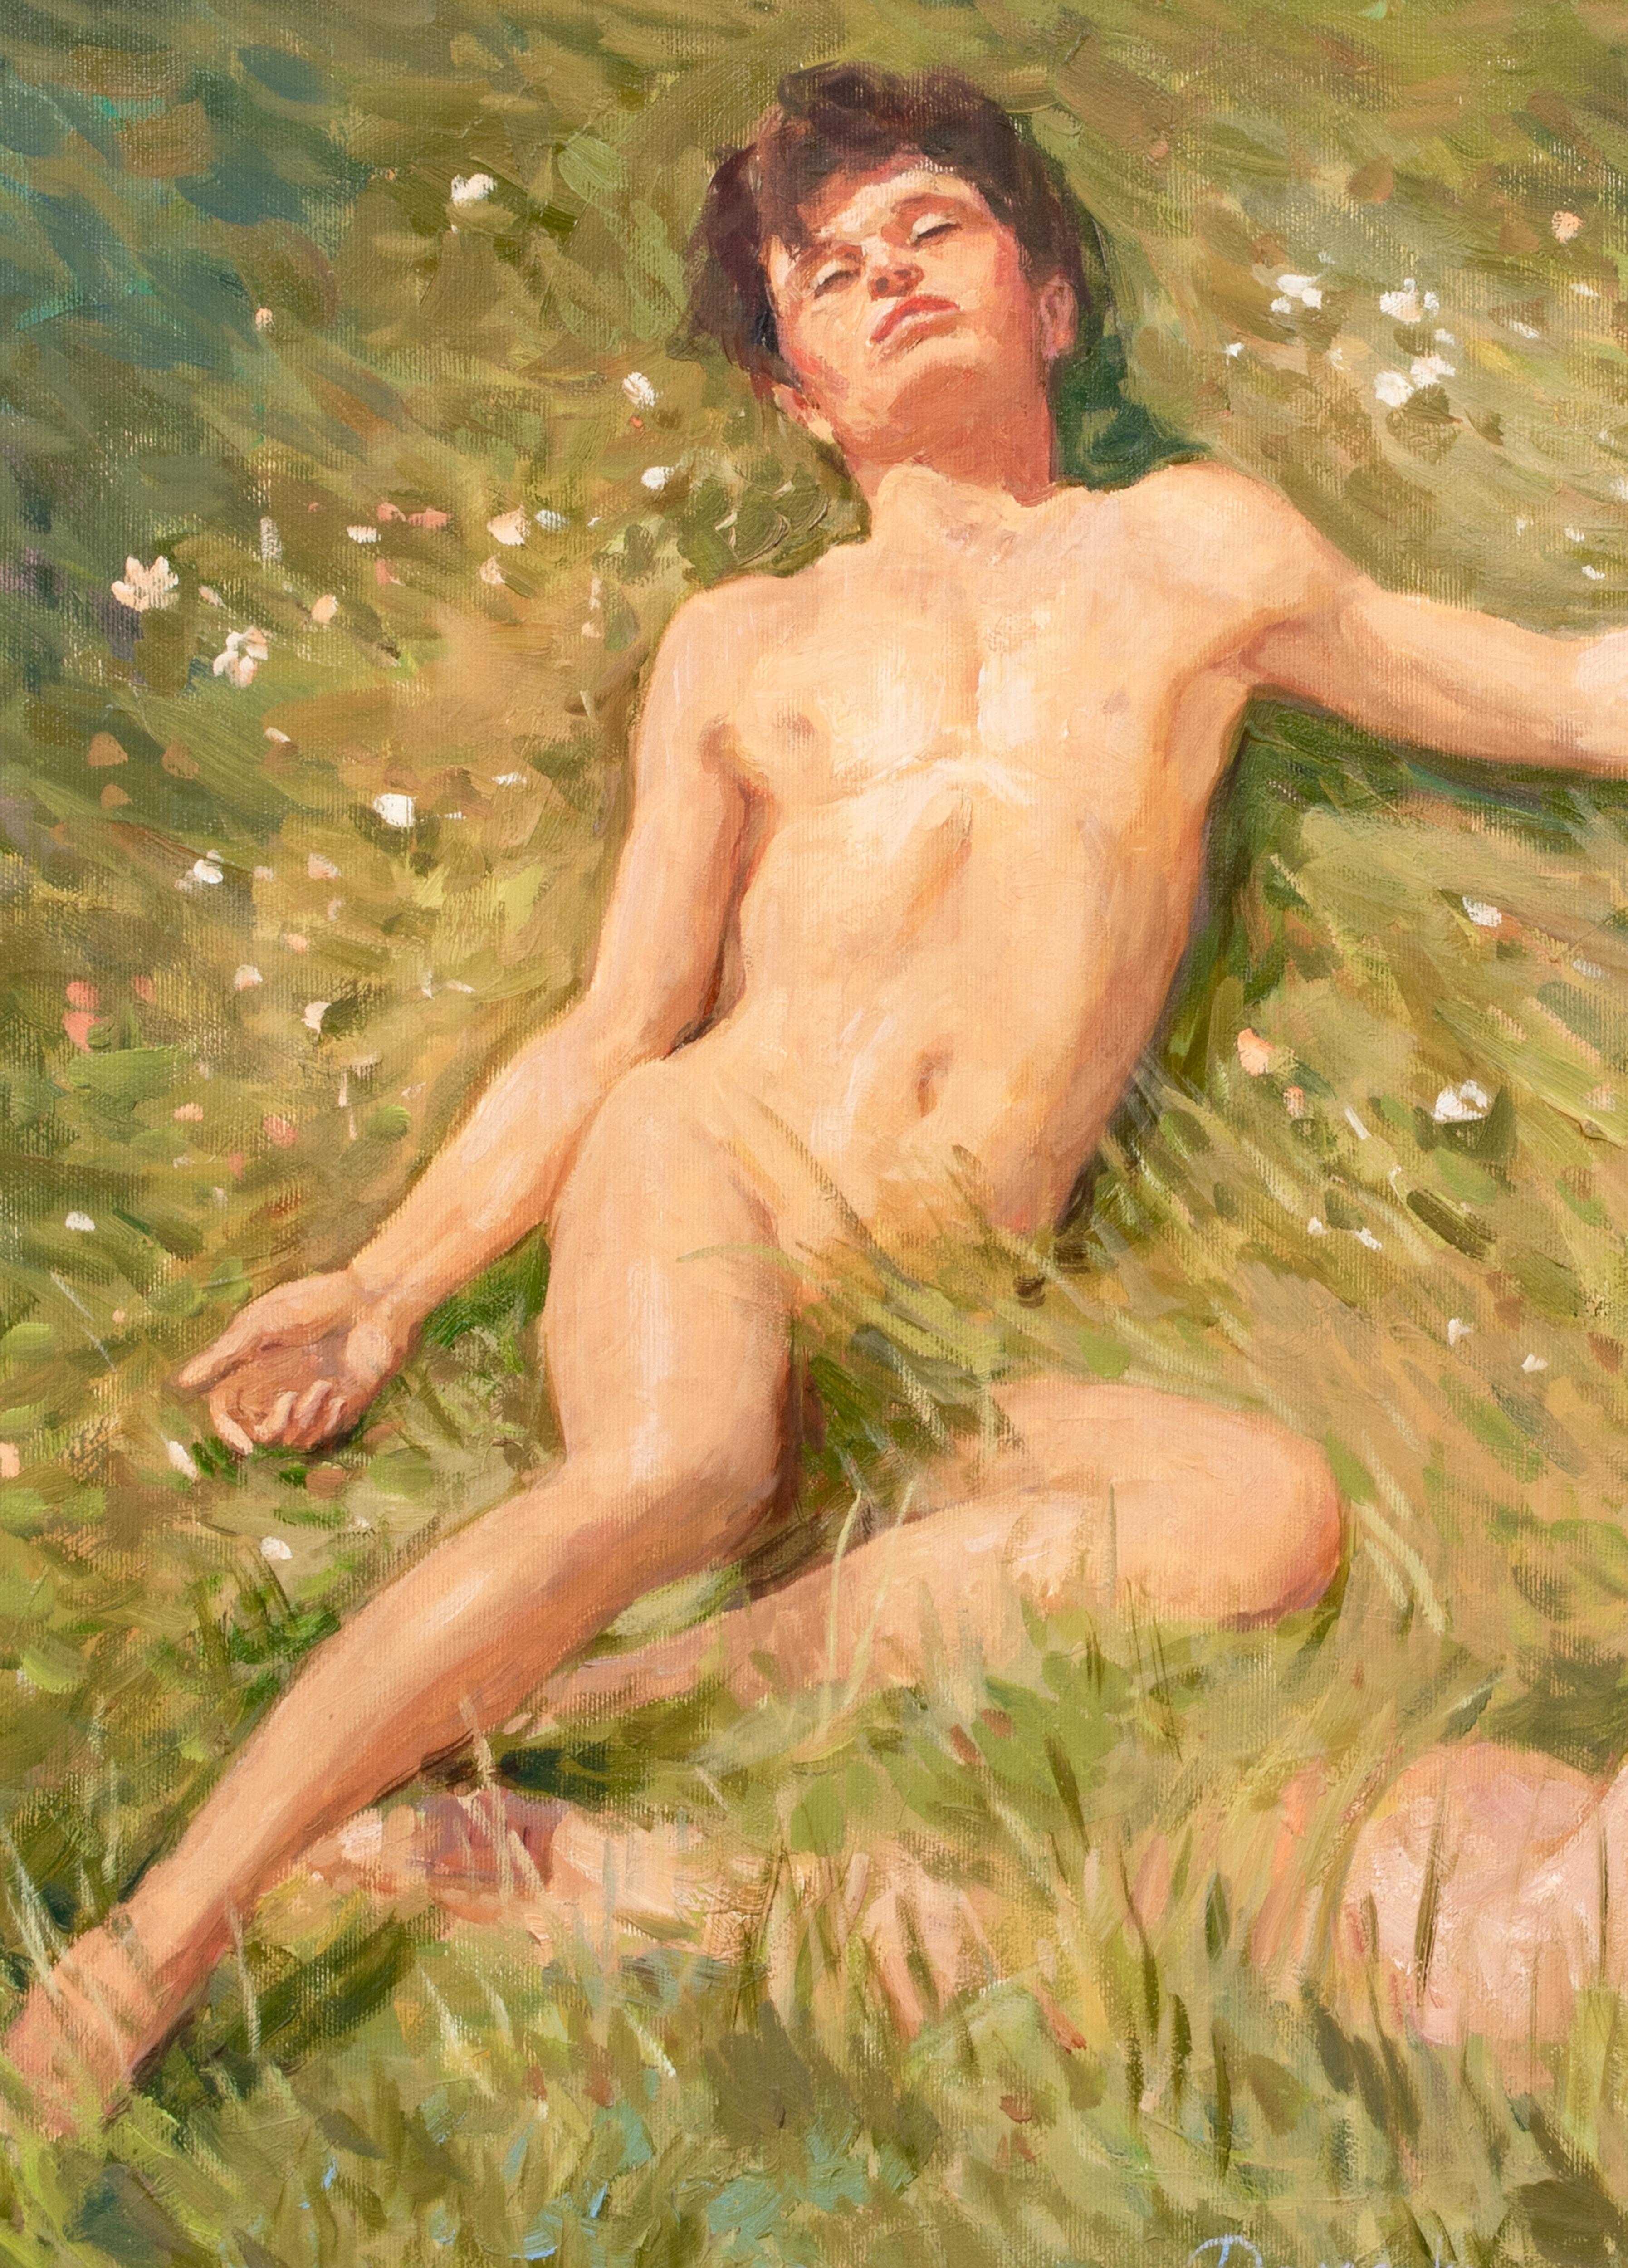 Nude Boys In The Summer Grass   For Sale 3